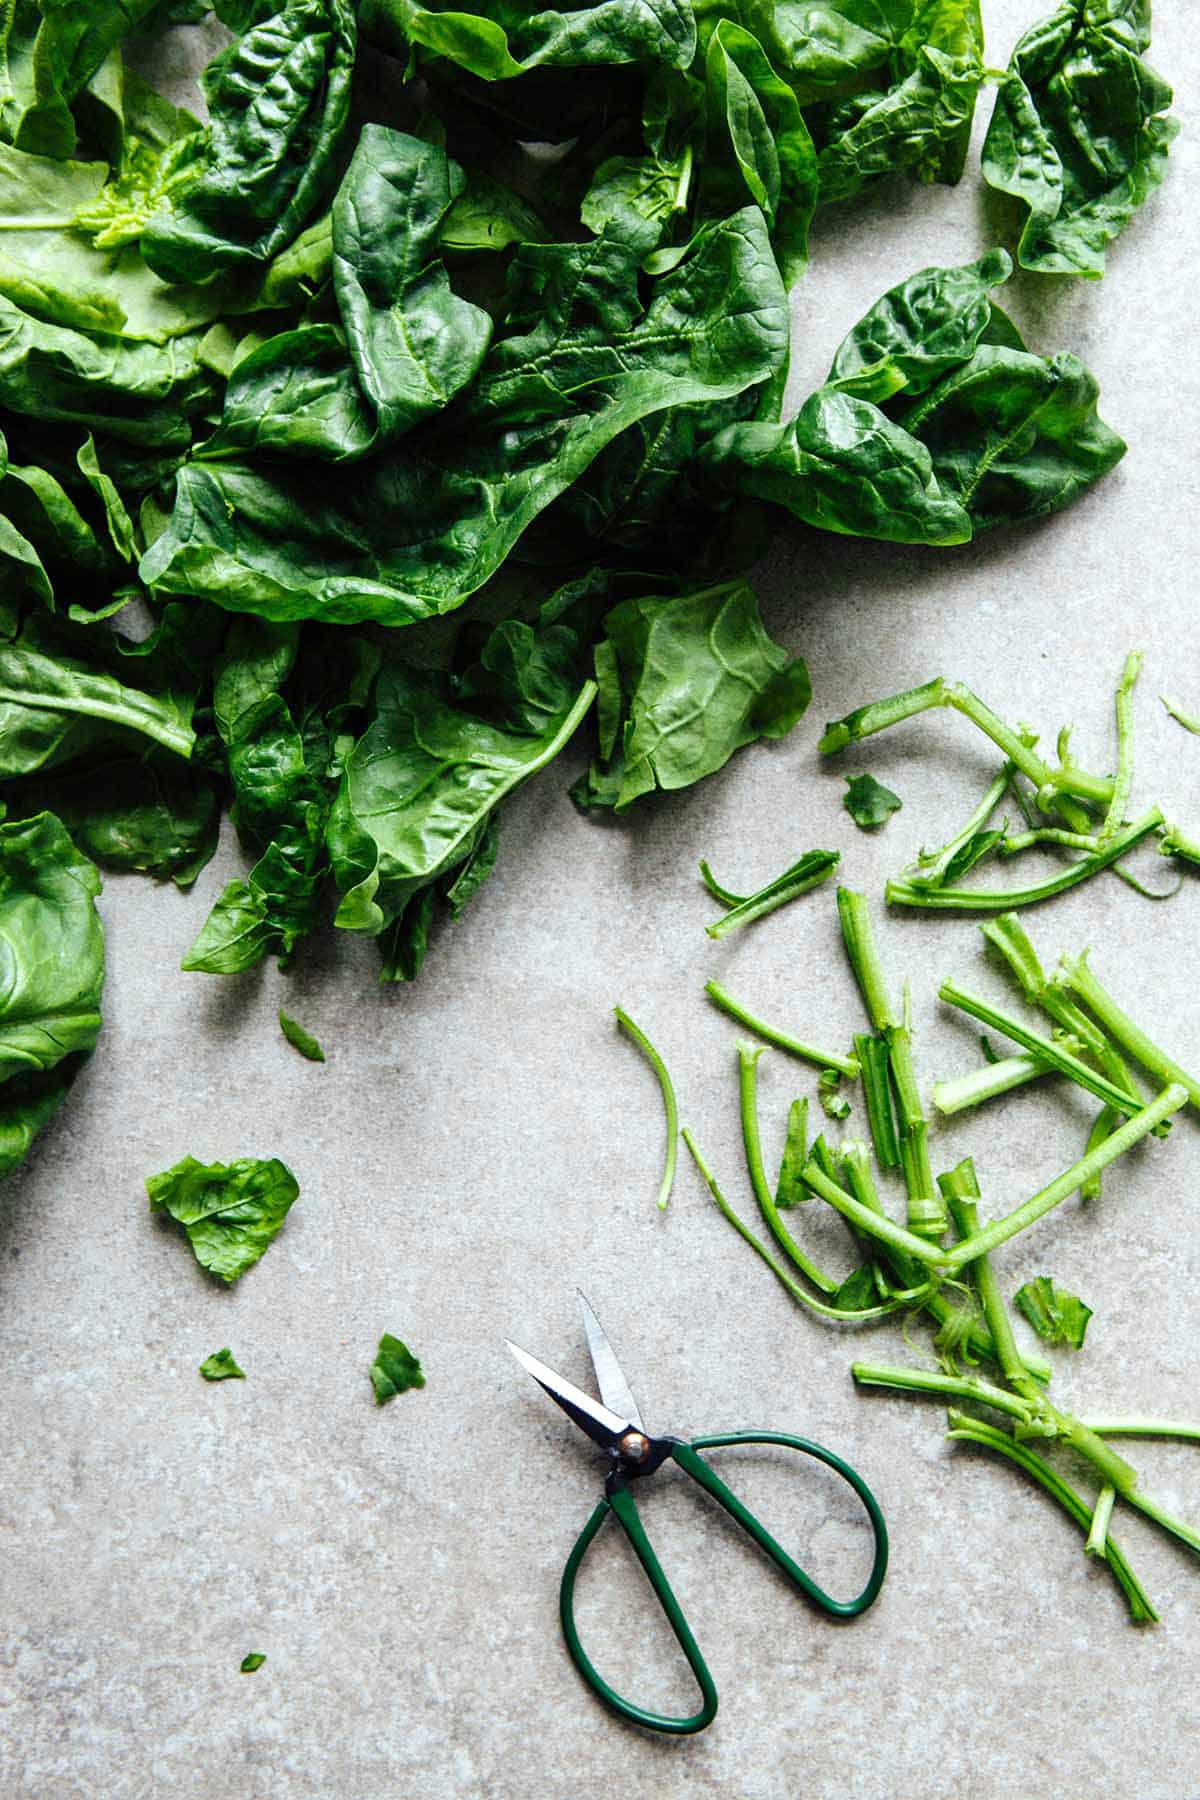 Spinach leaves with the cut off stems nearby and a small pair of green-handled scissors.